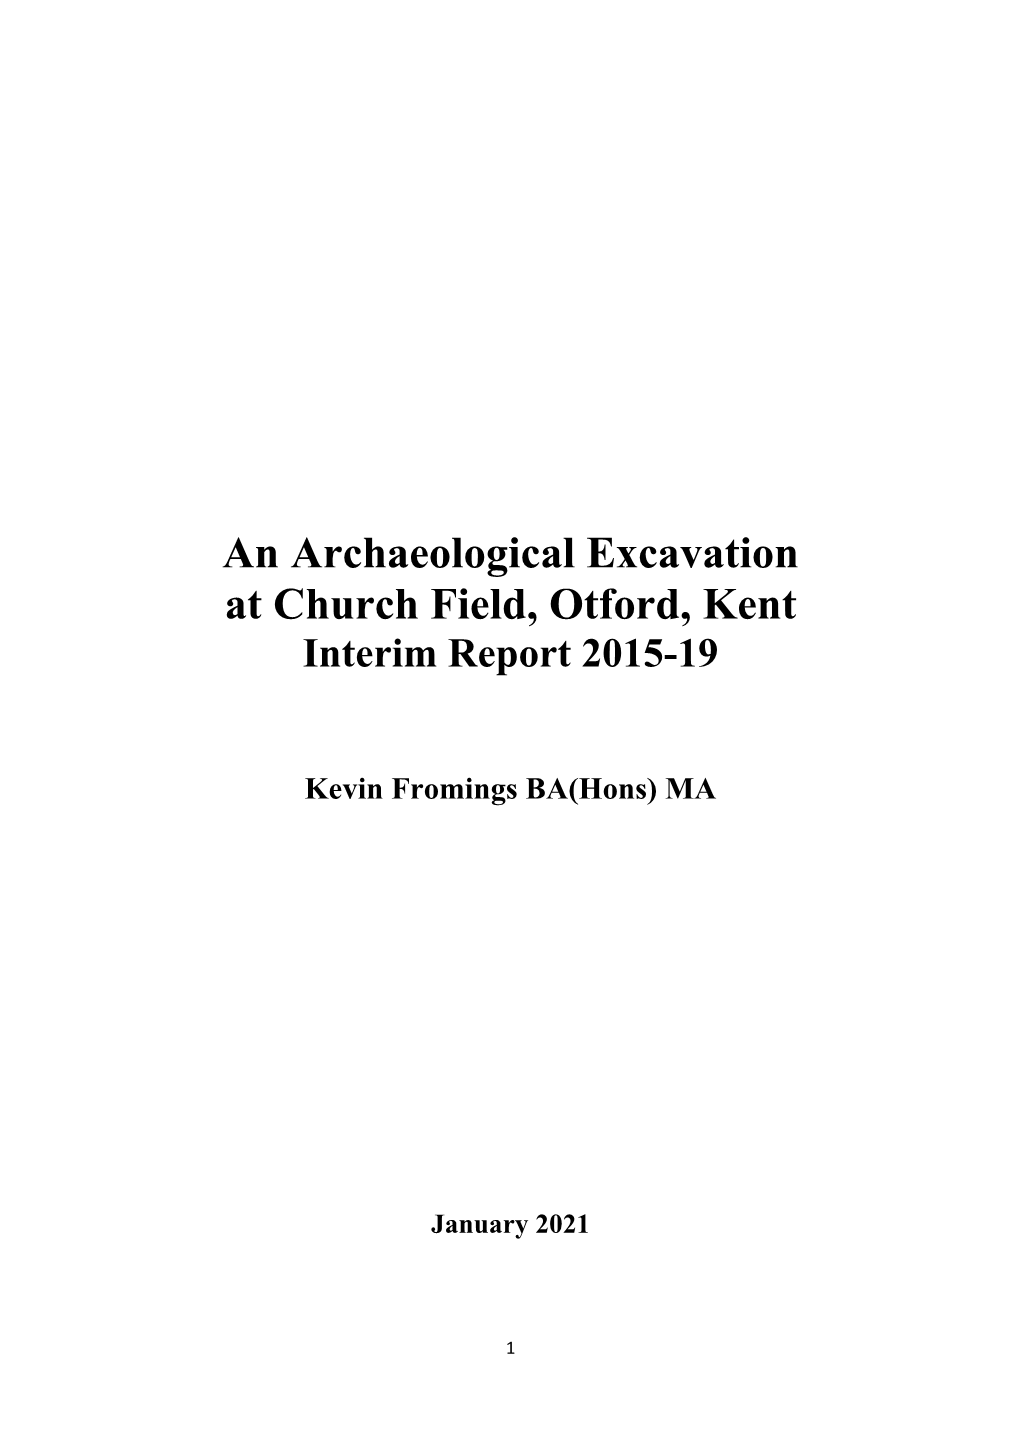 An Archaeological Excavation at Church Field, Otford, Kent Interim Report 2015-19